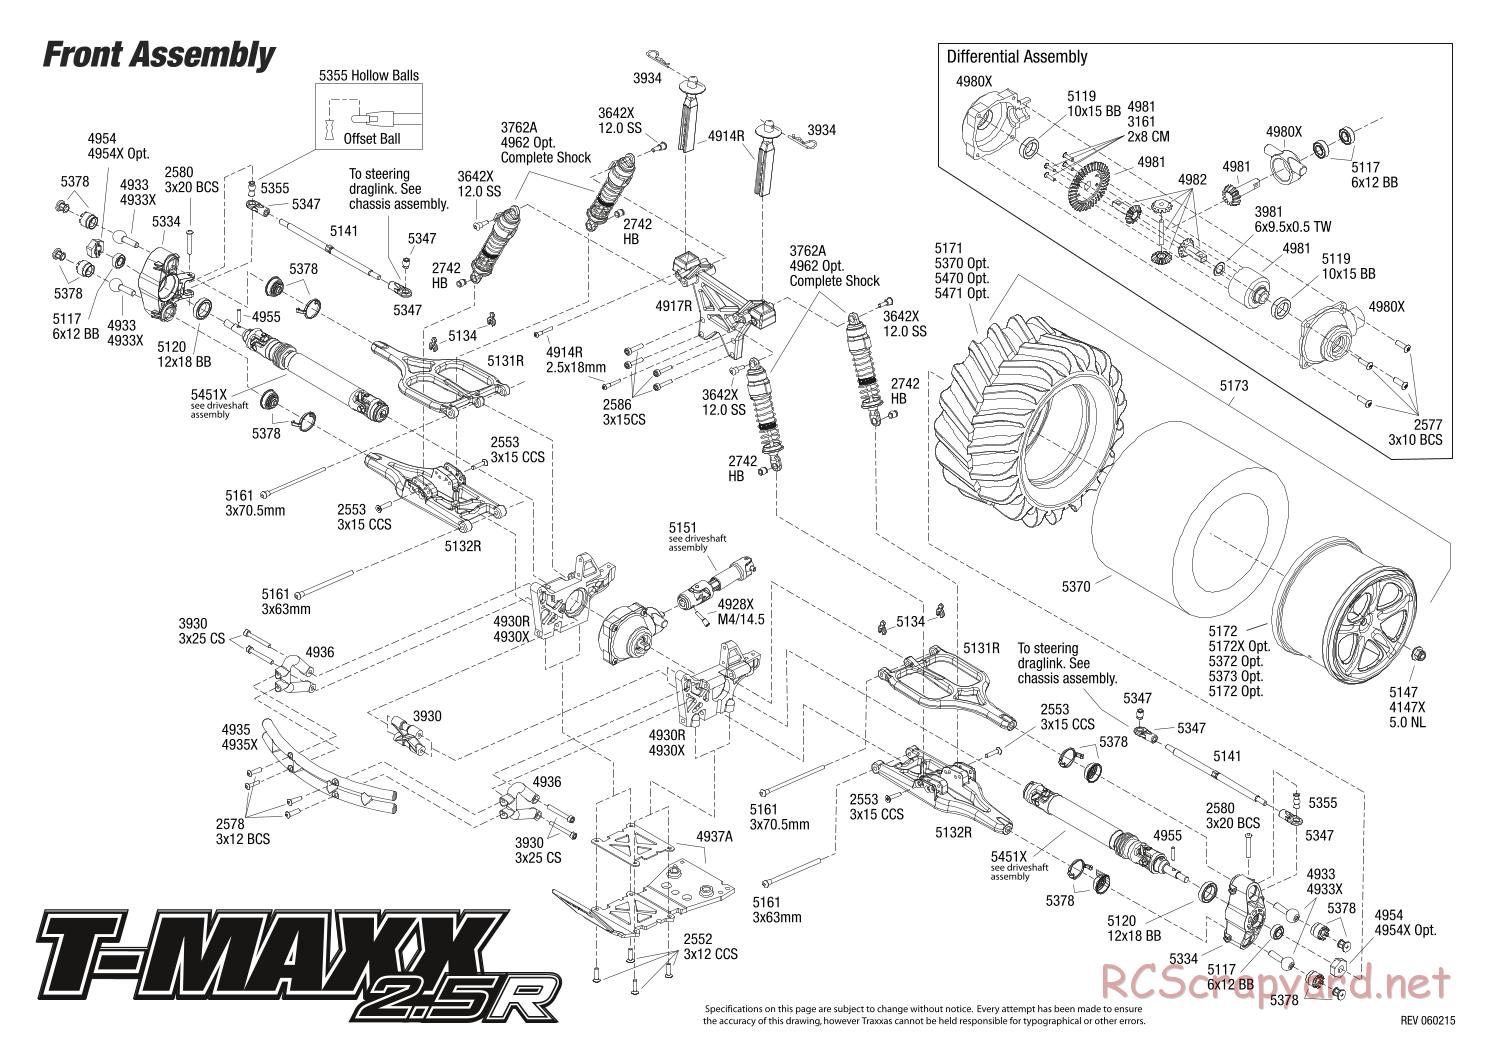 Traxxas - T-Maxx 2.5R (2006) - Exploded Views - Page 4